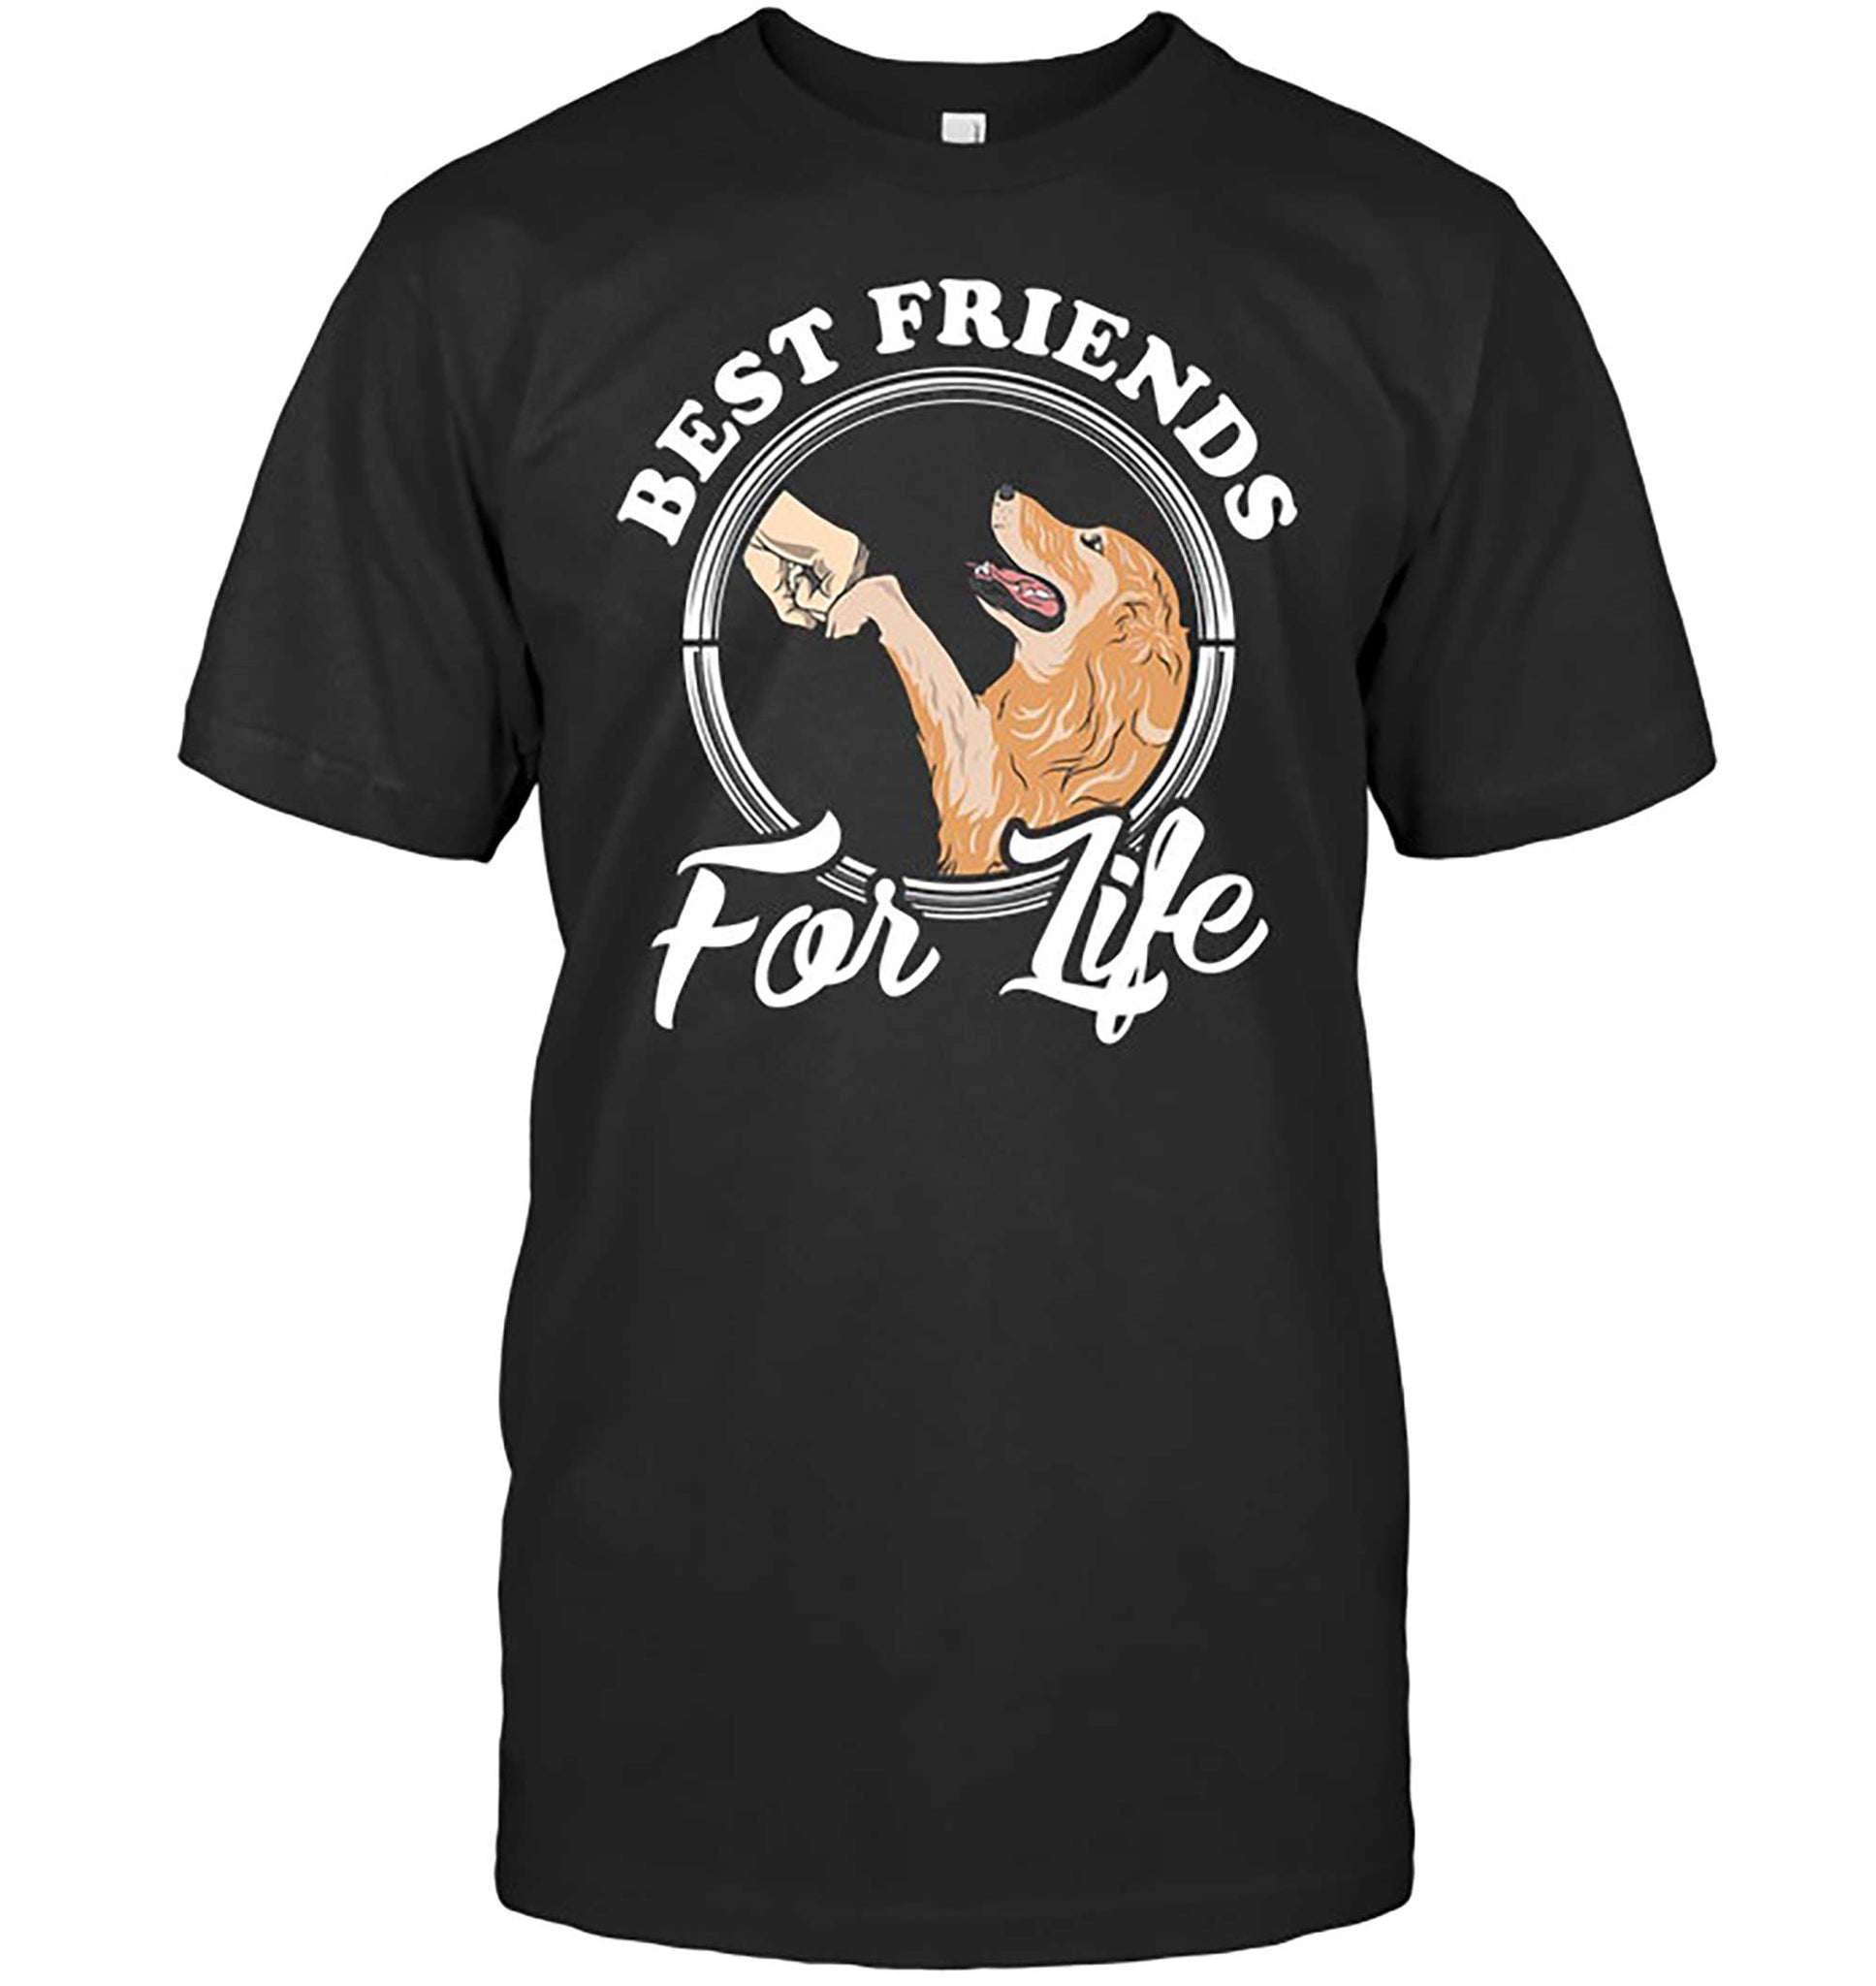 Skitongift-Best-Friend-For-Life-Golden-Retriever-Funny-Shirts-Hoodie-Sweater-Short-Sleeve-Casual-Shirt